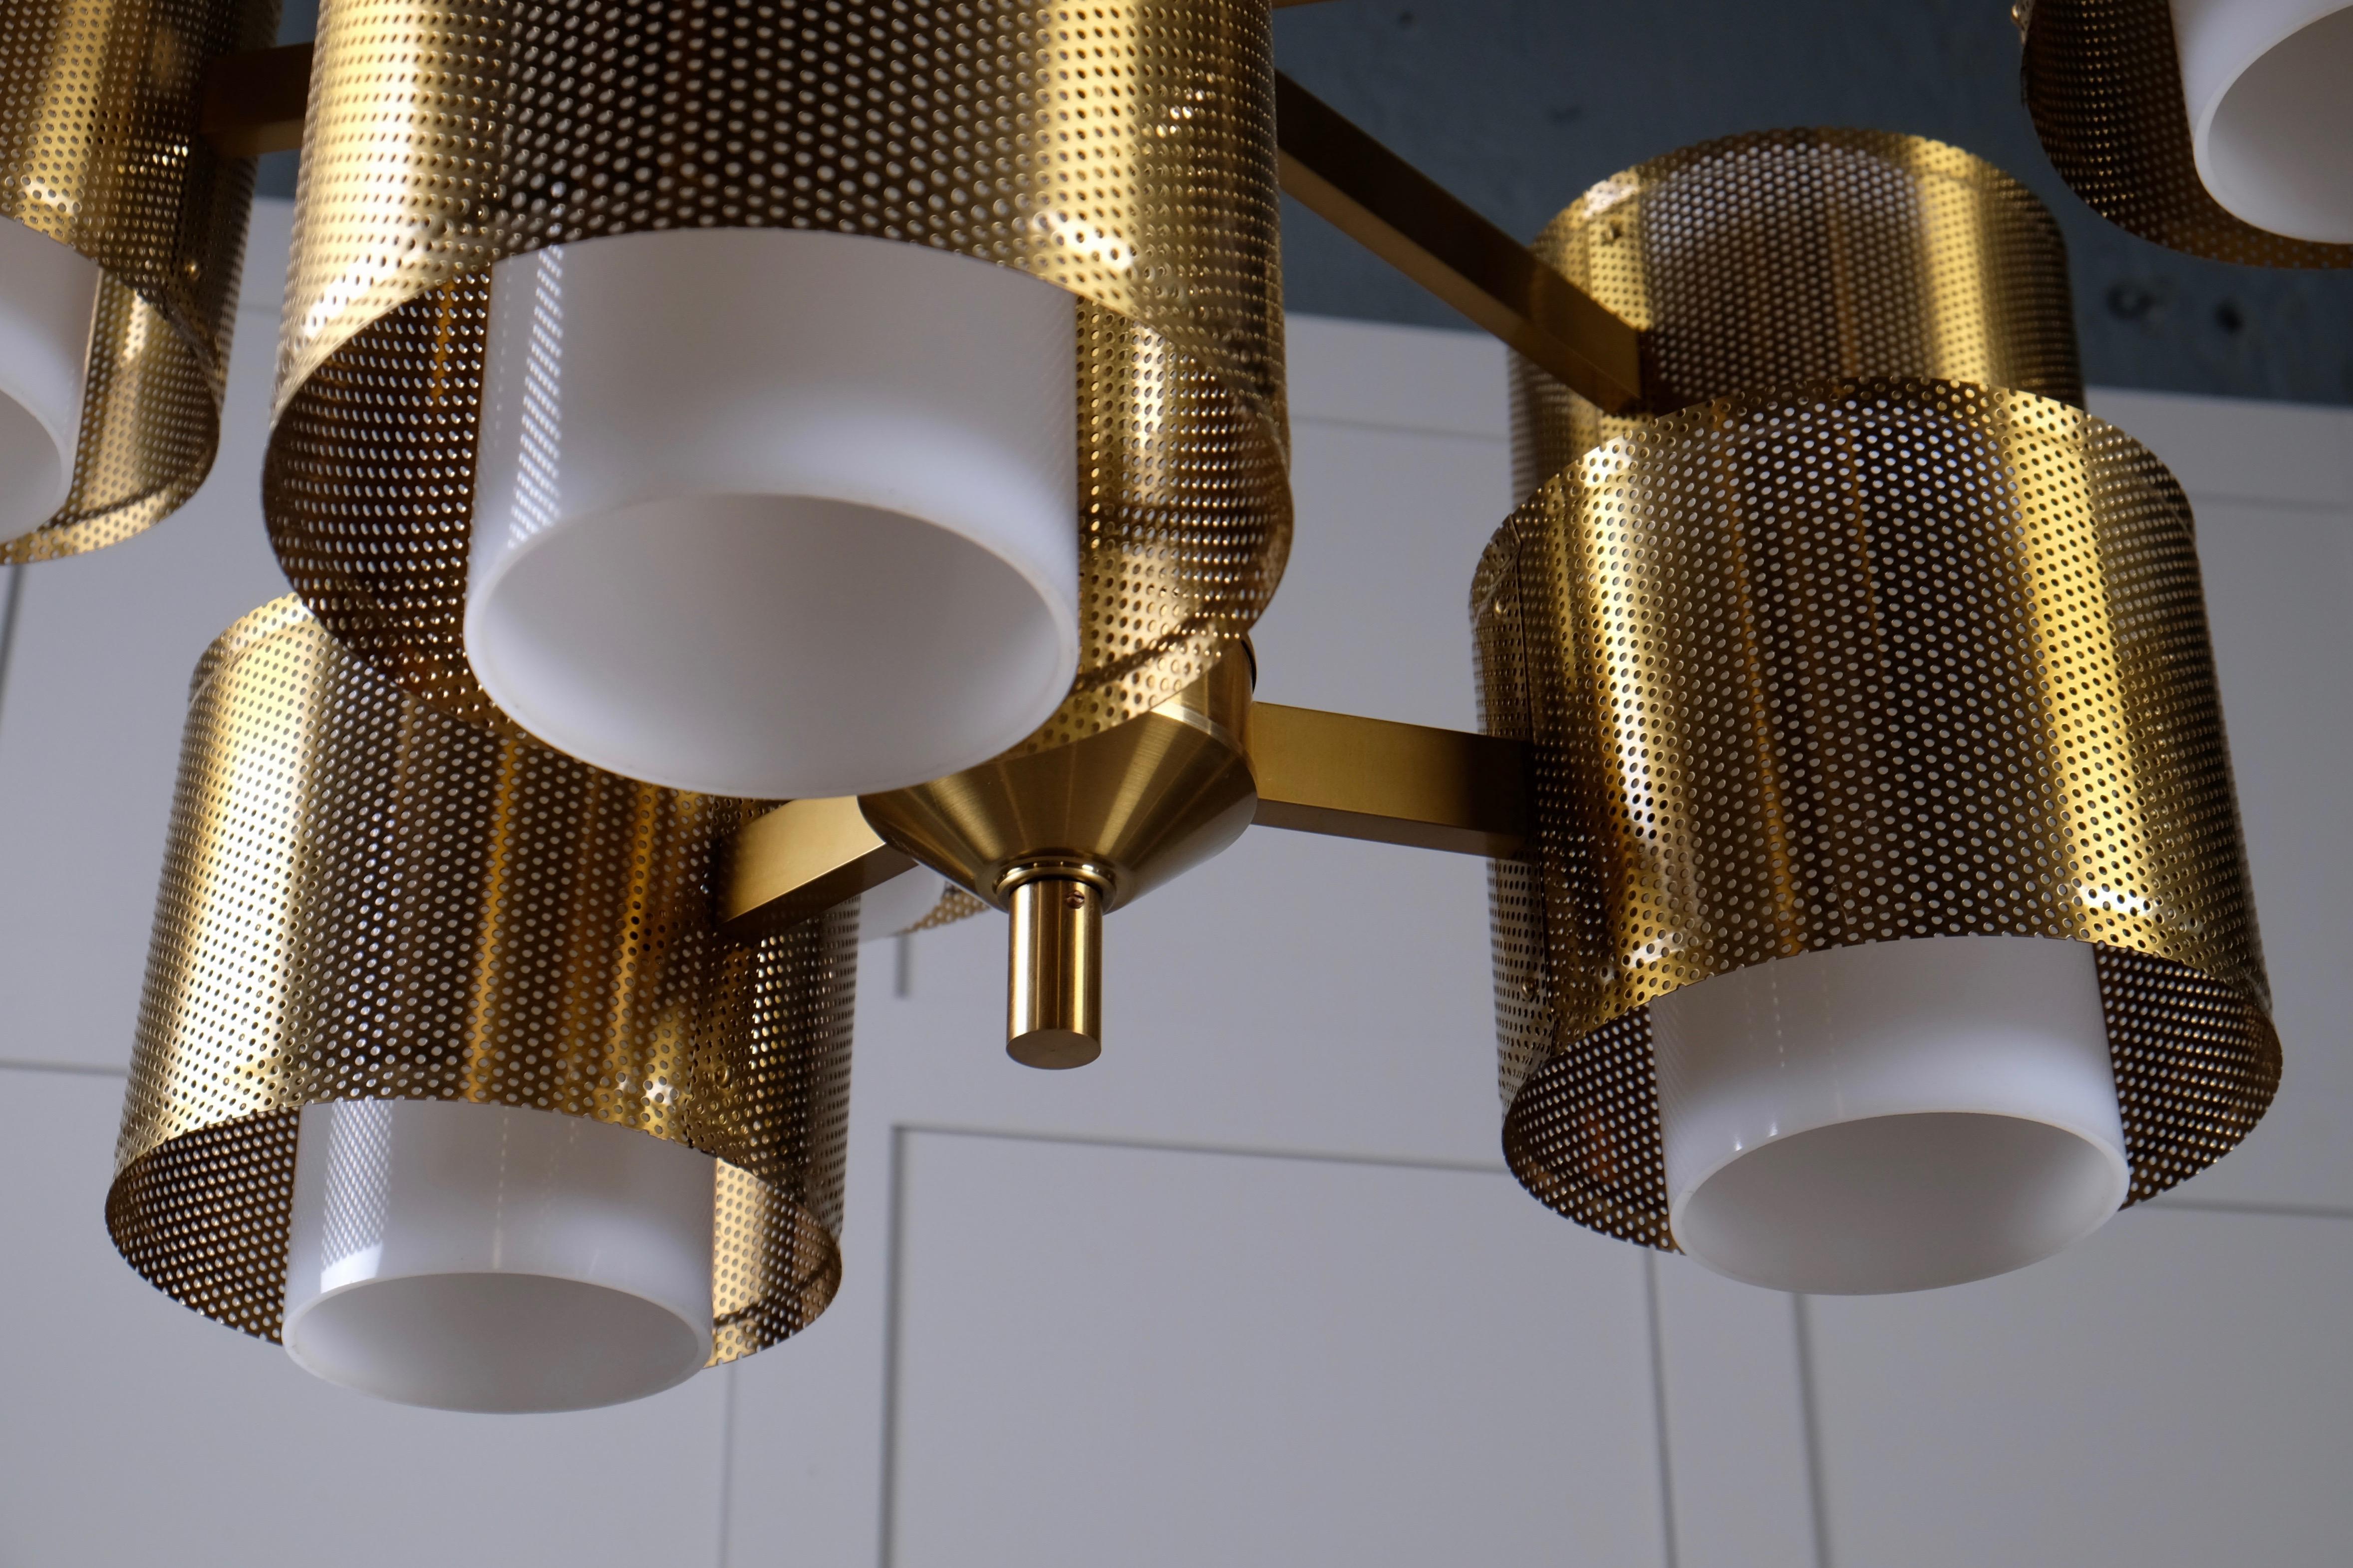 Set of 3 Brass Chandeliers by Holger Johansson, Sweden, 1960s For Sale 1